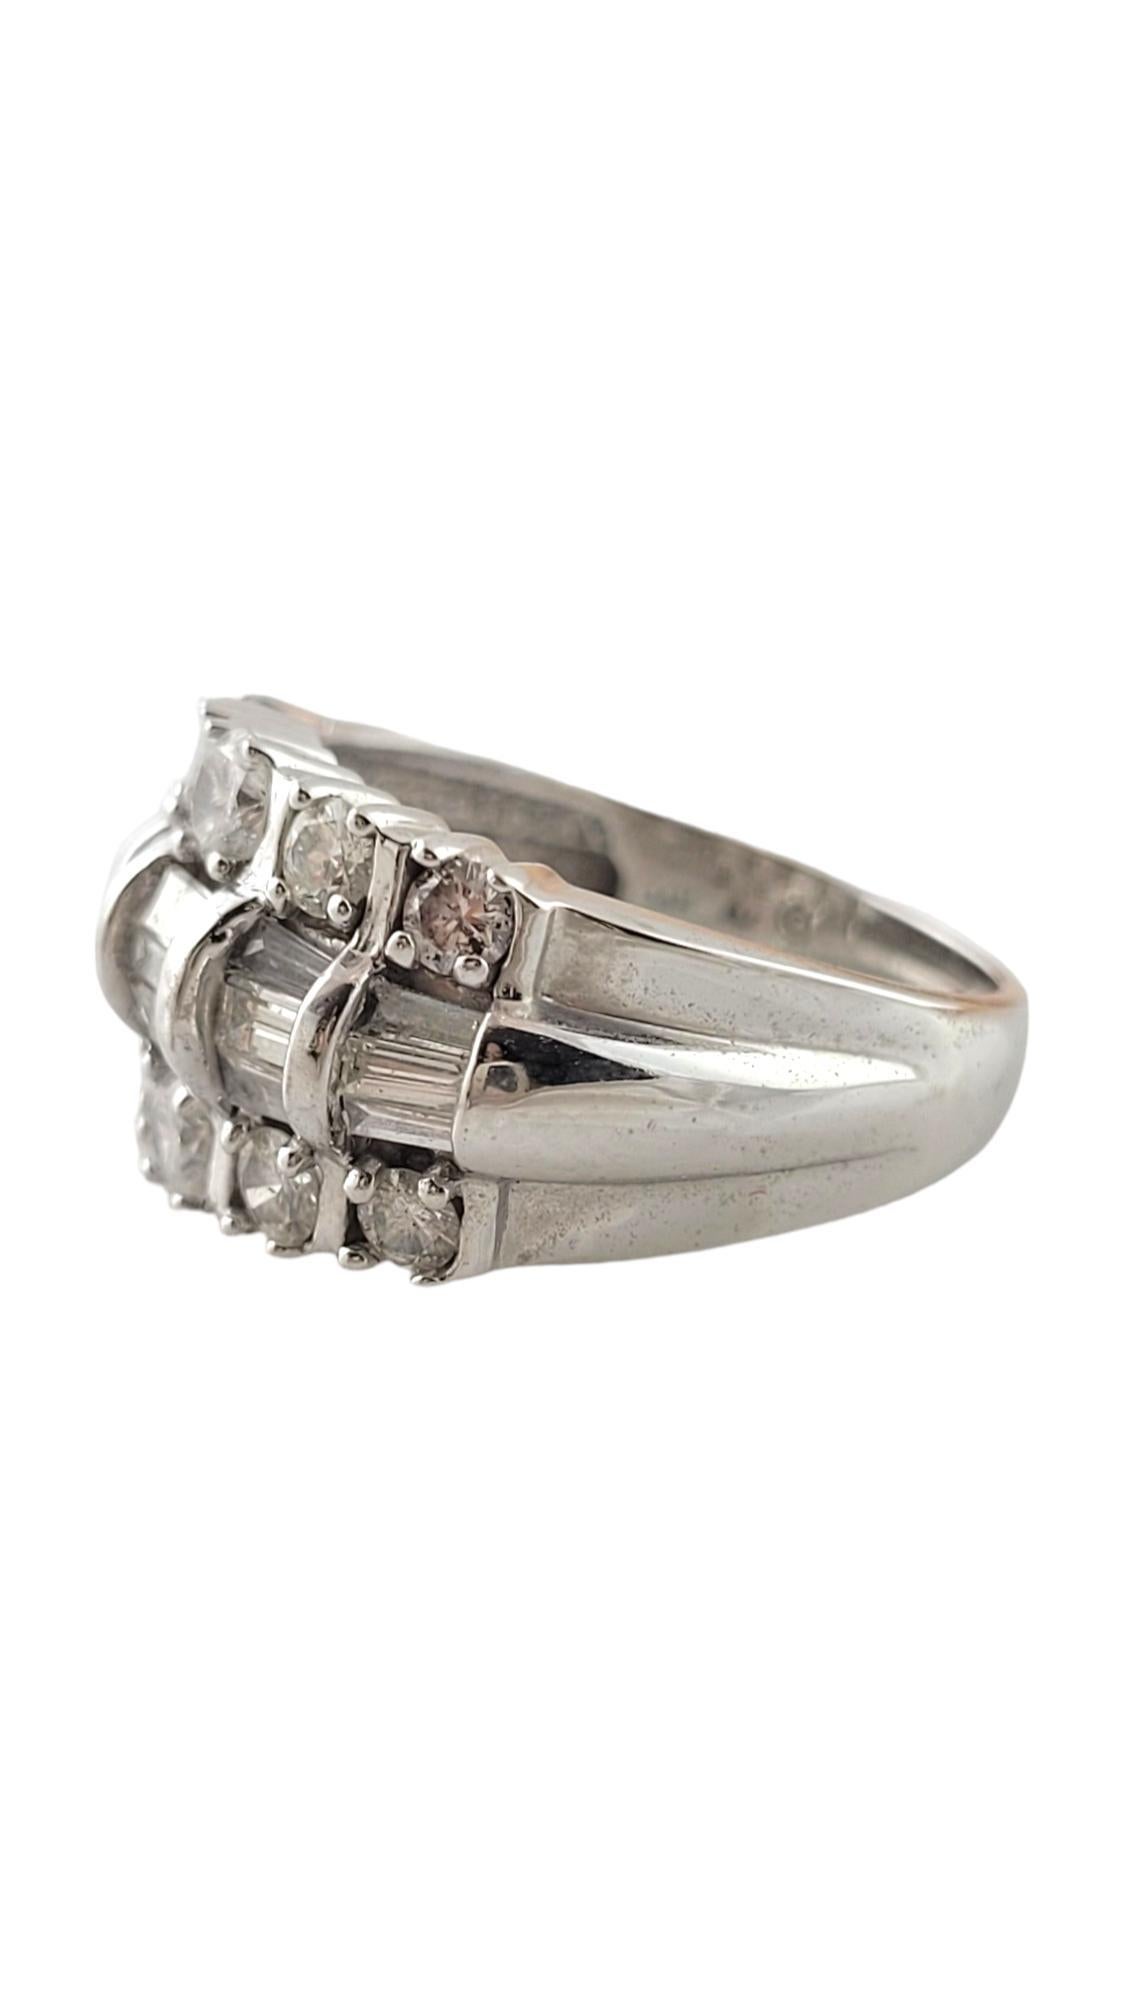 Vintage 14 Karat White Gold and Diamond Band Size 7-

This spectacular ring features 15 baguette diamonds (.45 ct. twt.) and ten round brilliant cut diamonds (.82 ct. twt.) set in beautifully detailed 14K white gold. Width: 12 mm. Shank: 3